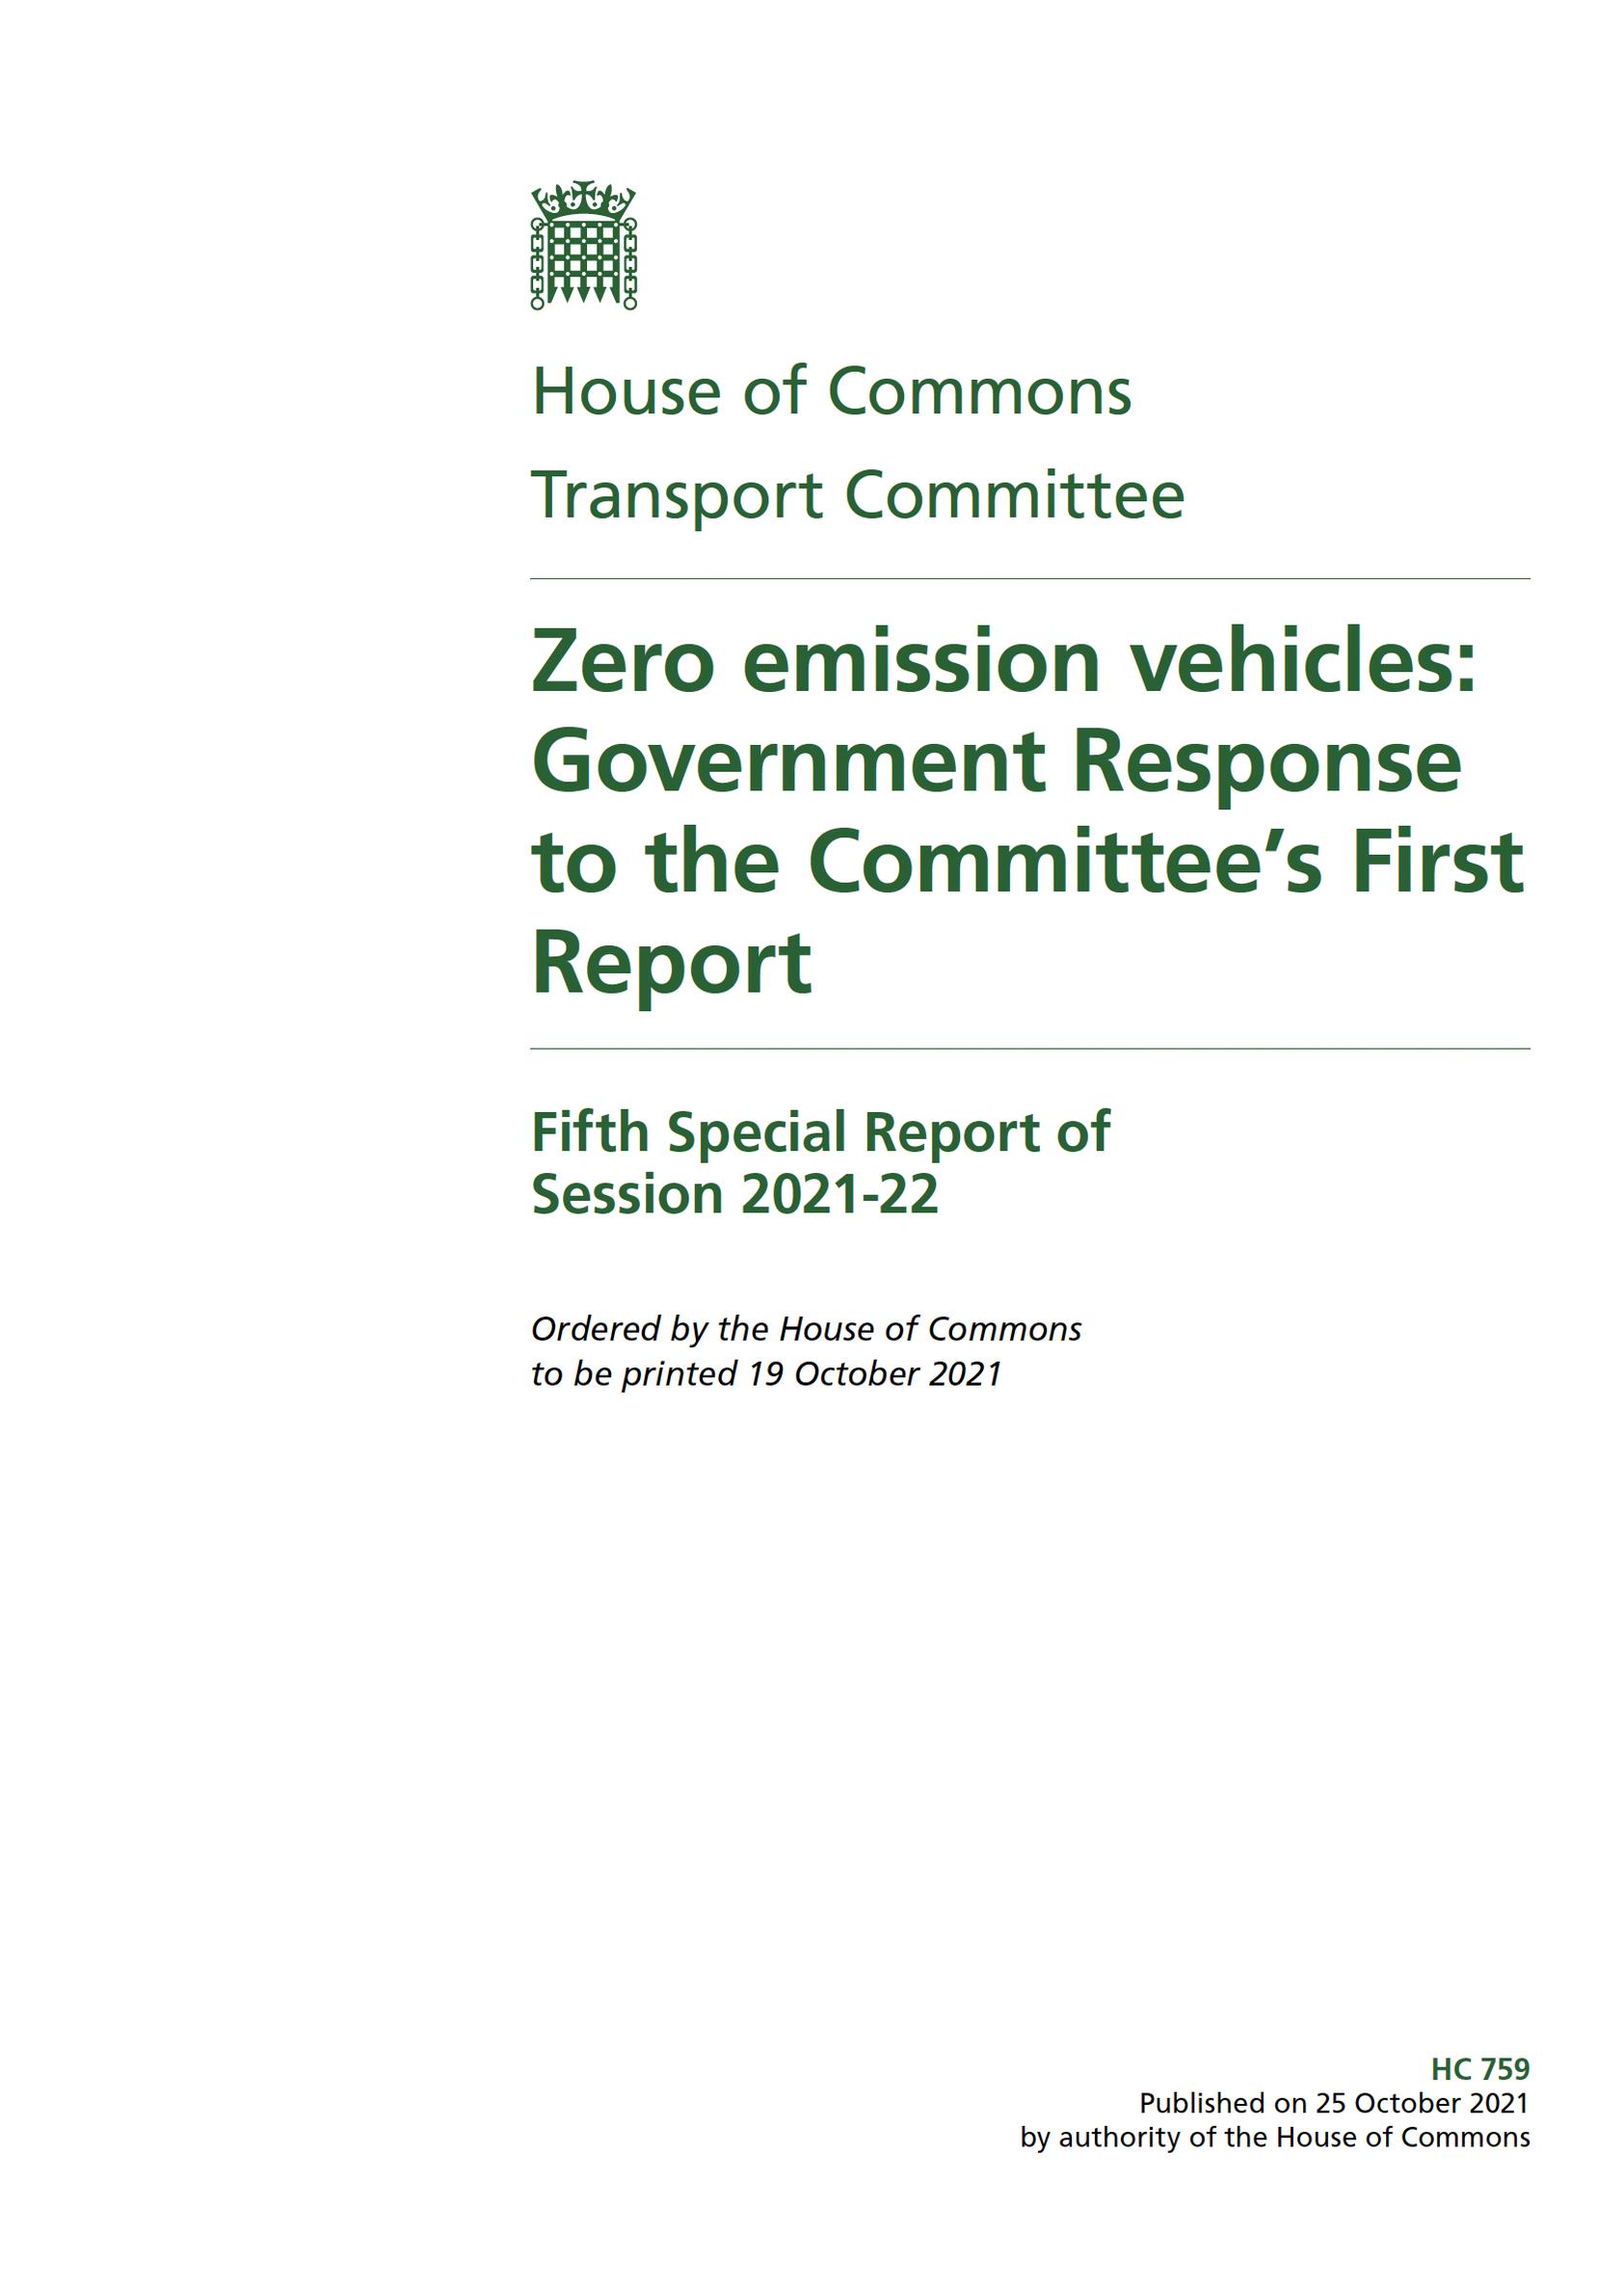 The government’s response to the Transport Committee’s report: Zero emission vehicles